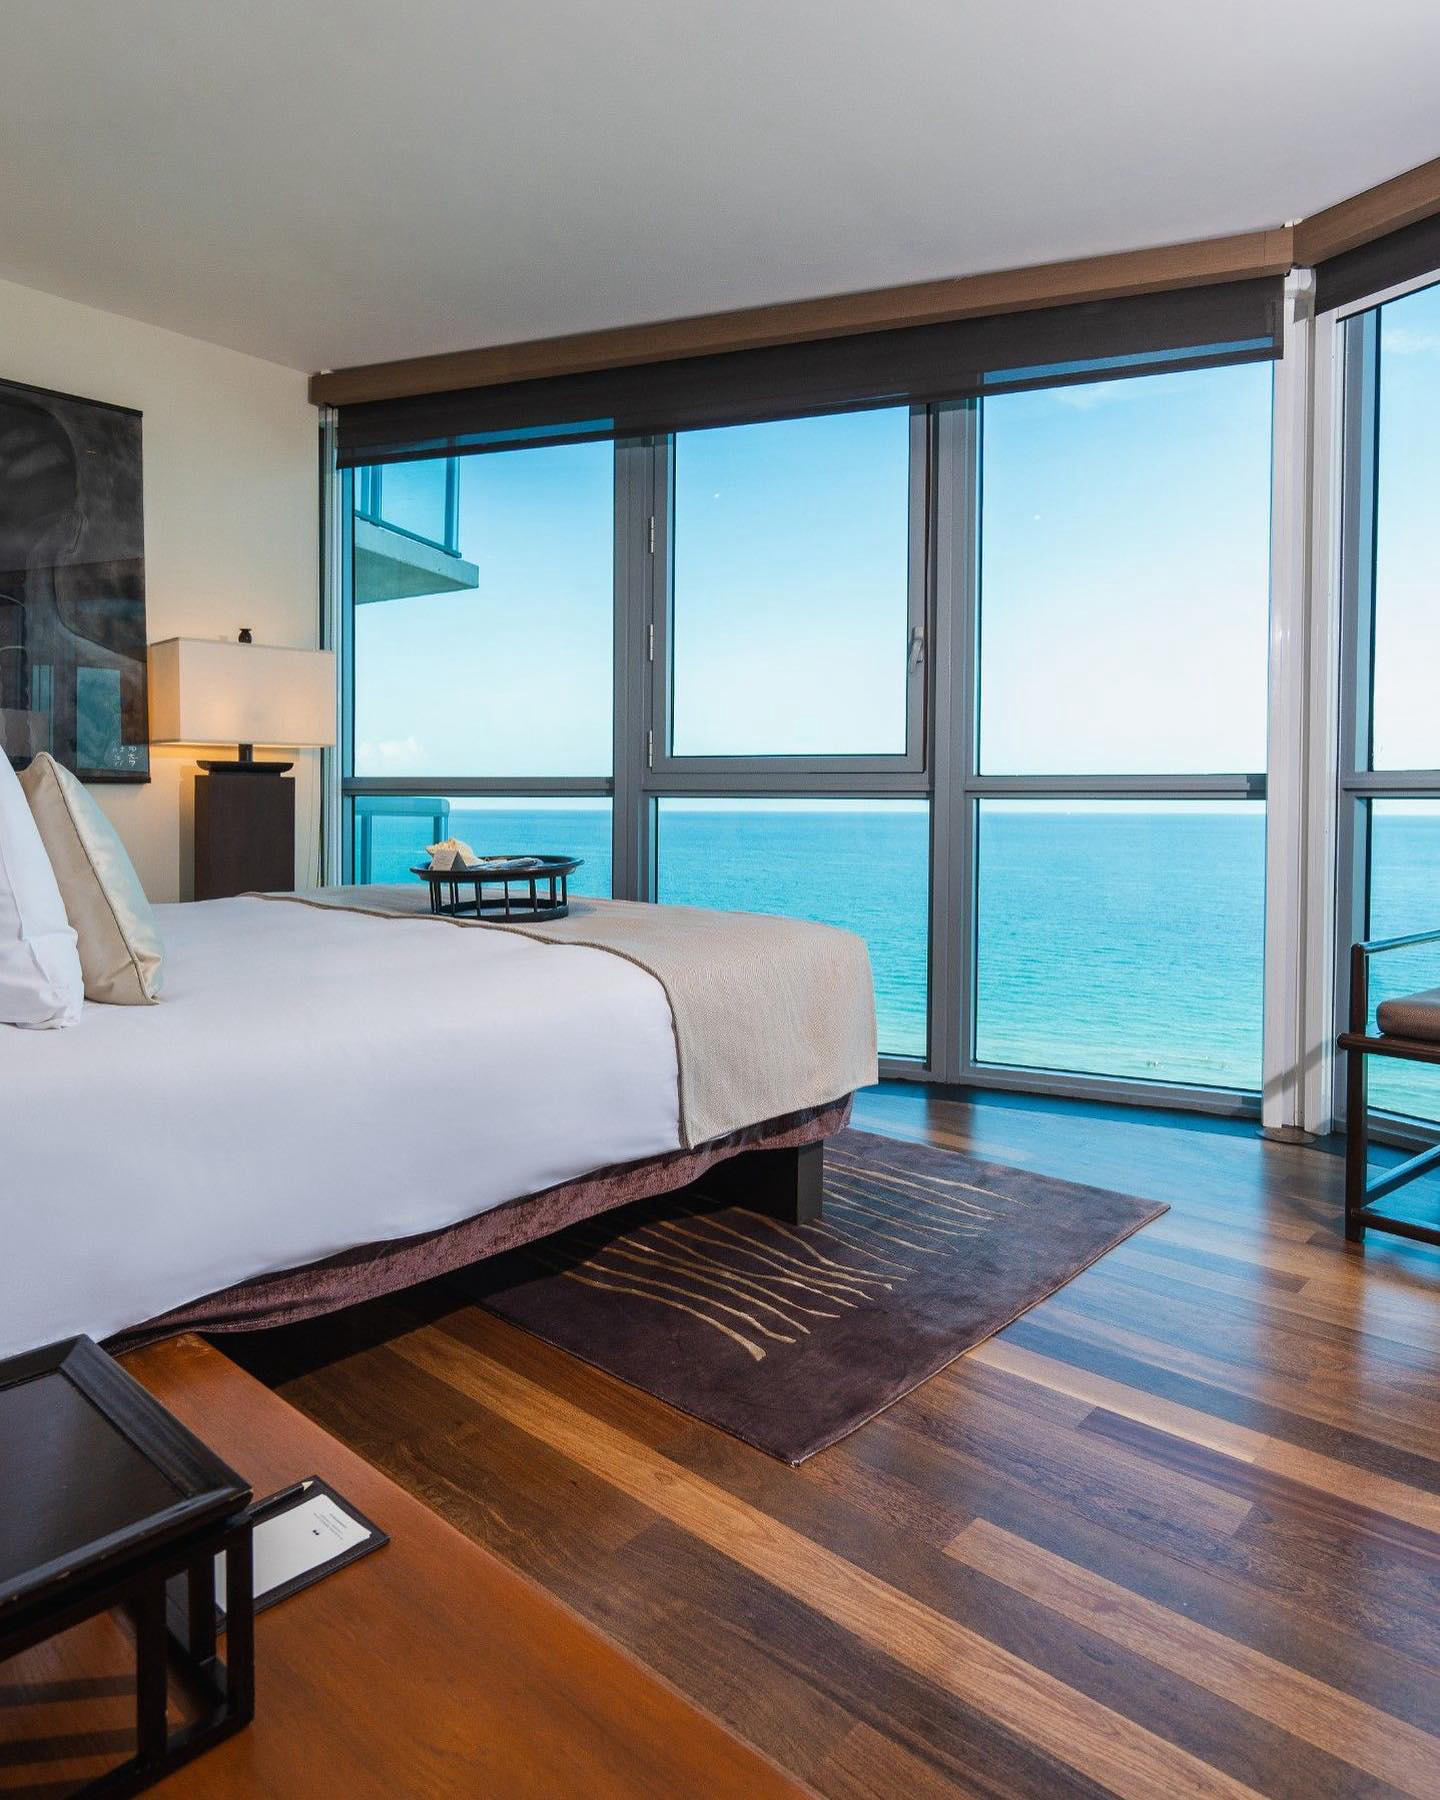 image  1 The Setai, Miami Beach - Wake up to cerulean skies and endless views of the Atlantic Ocean from the